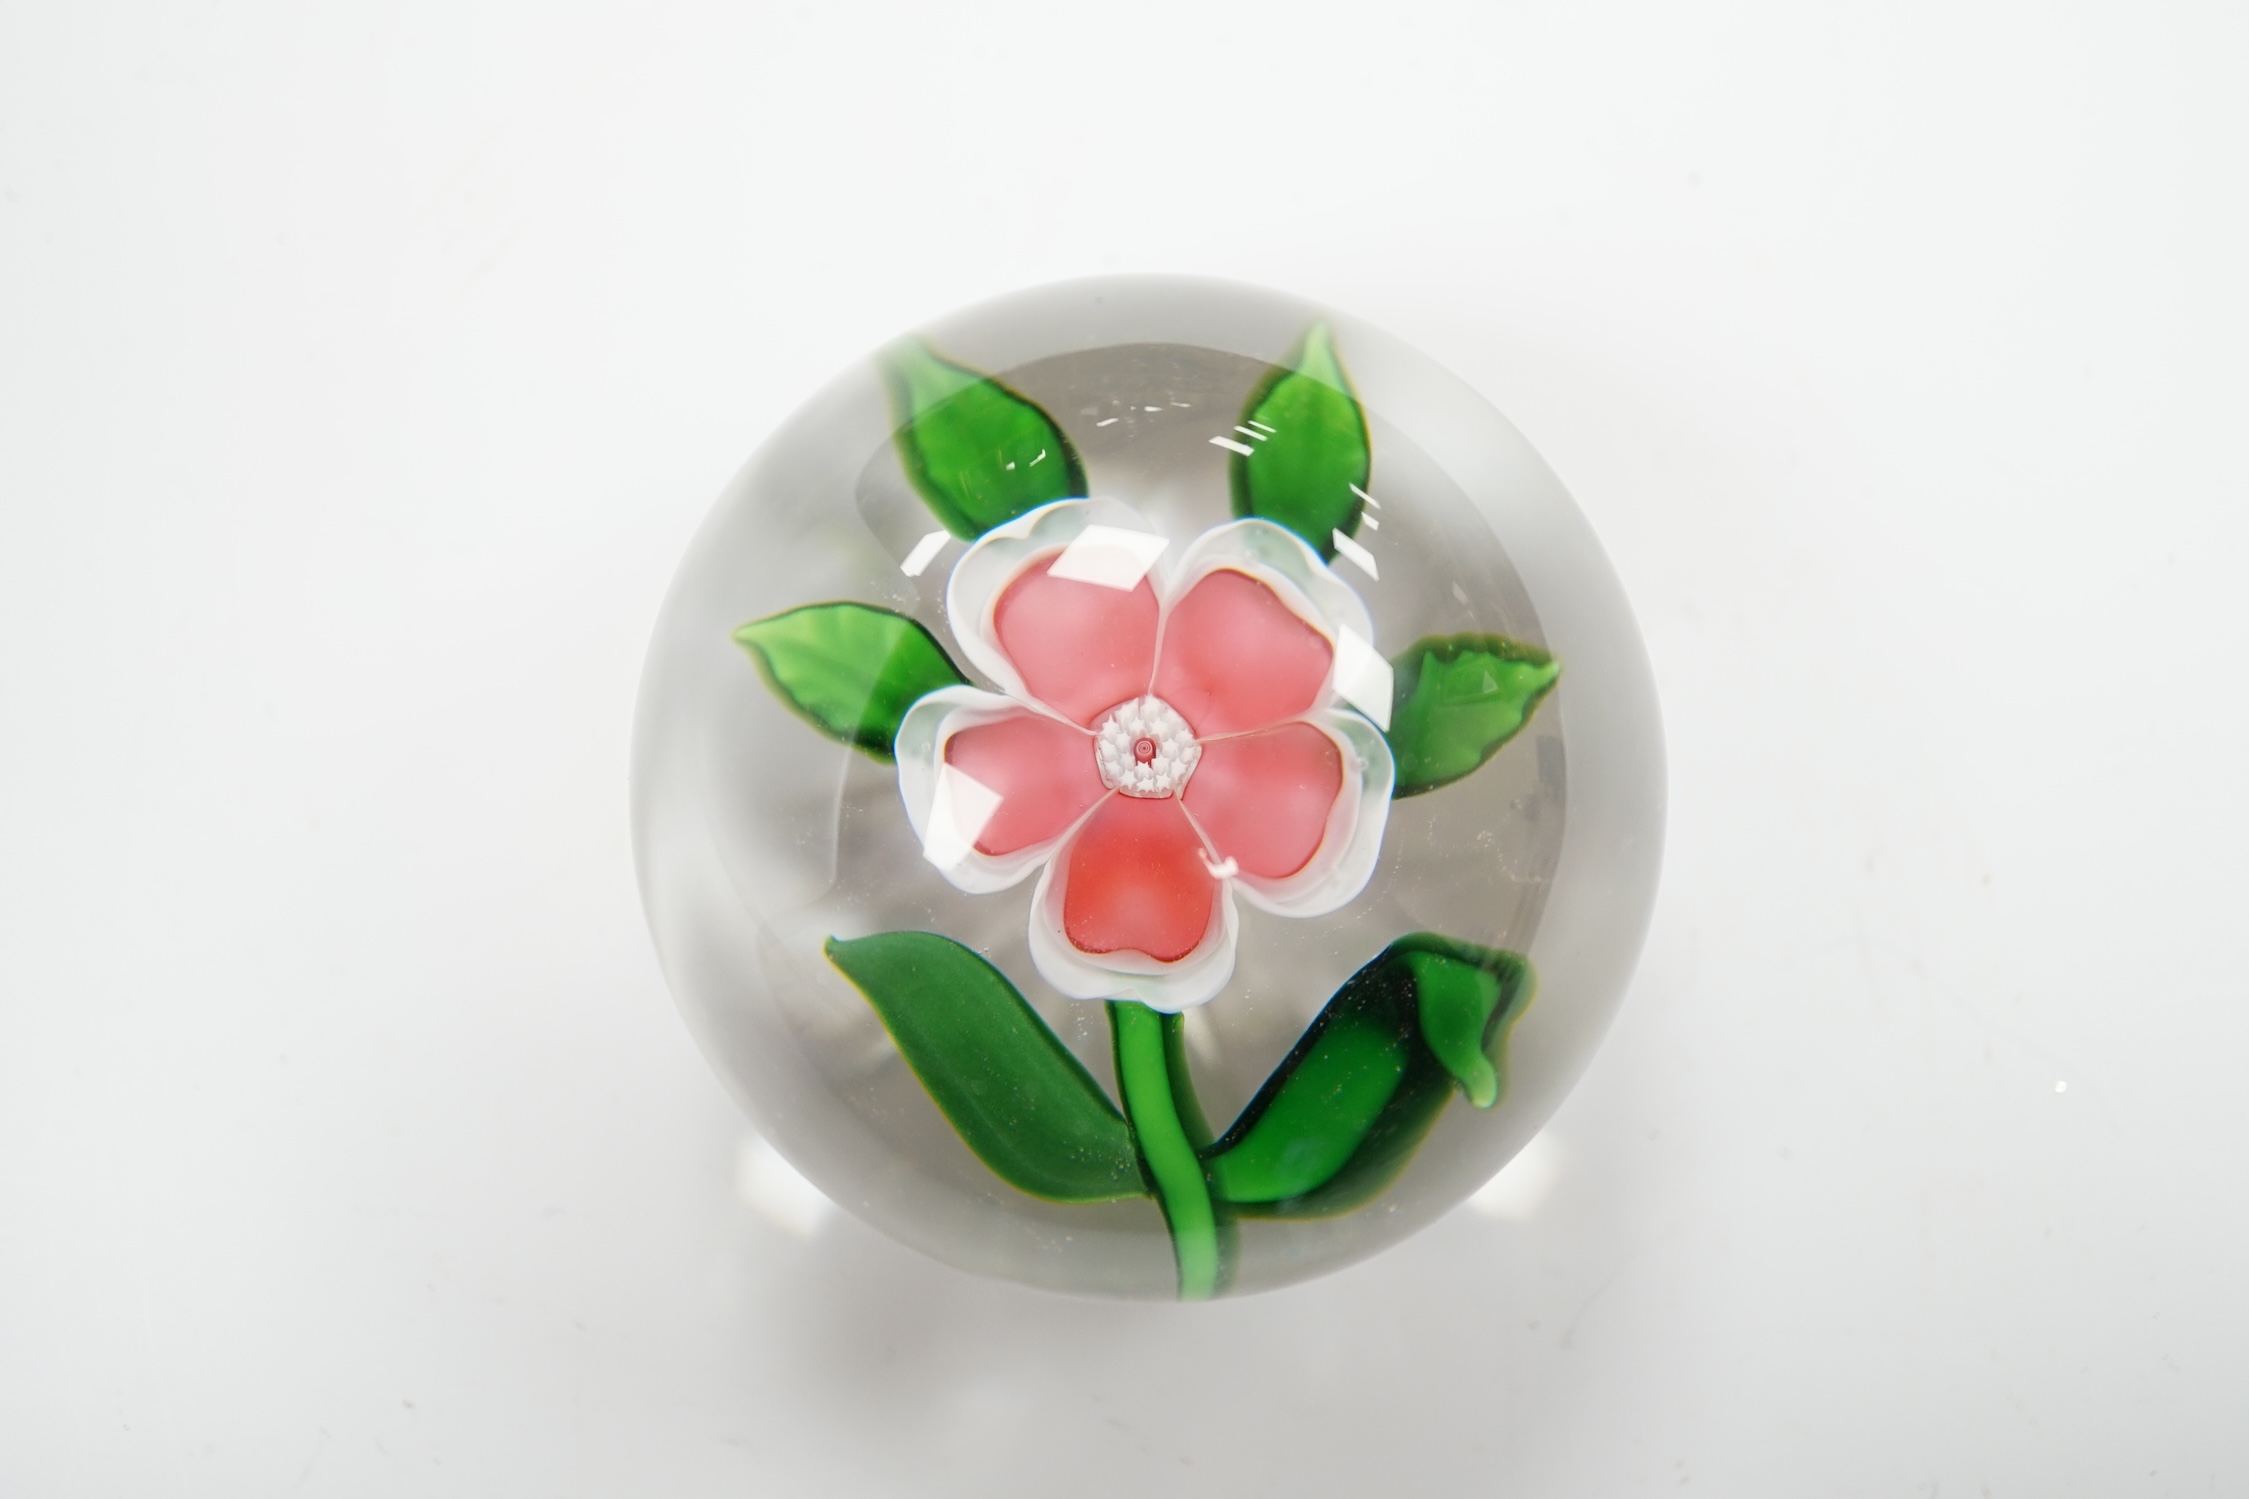 A Baccarat glass dog-rose paperweight, 6cm in diameter - Image 2 of 4